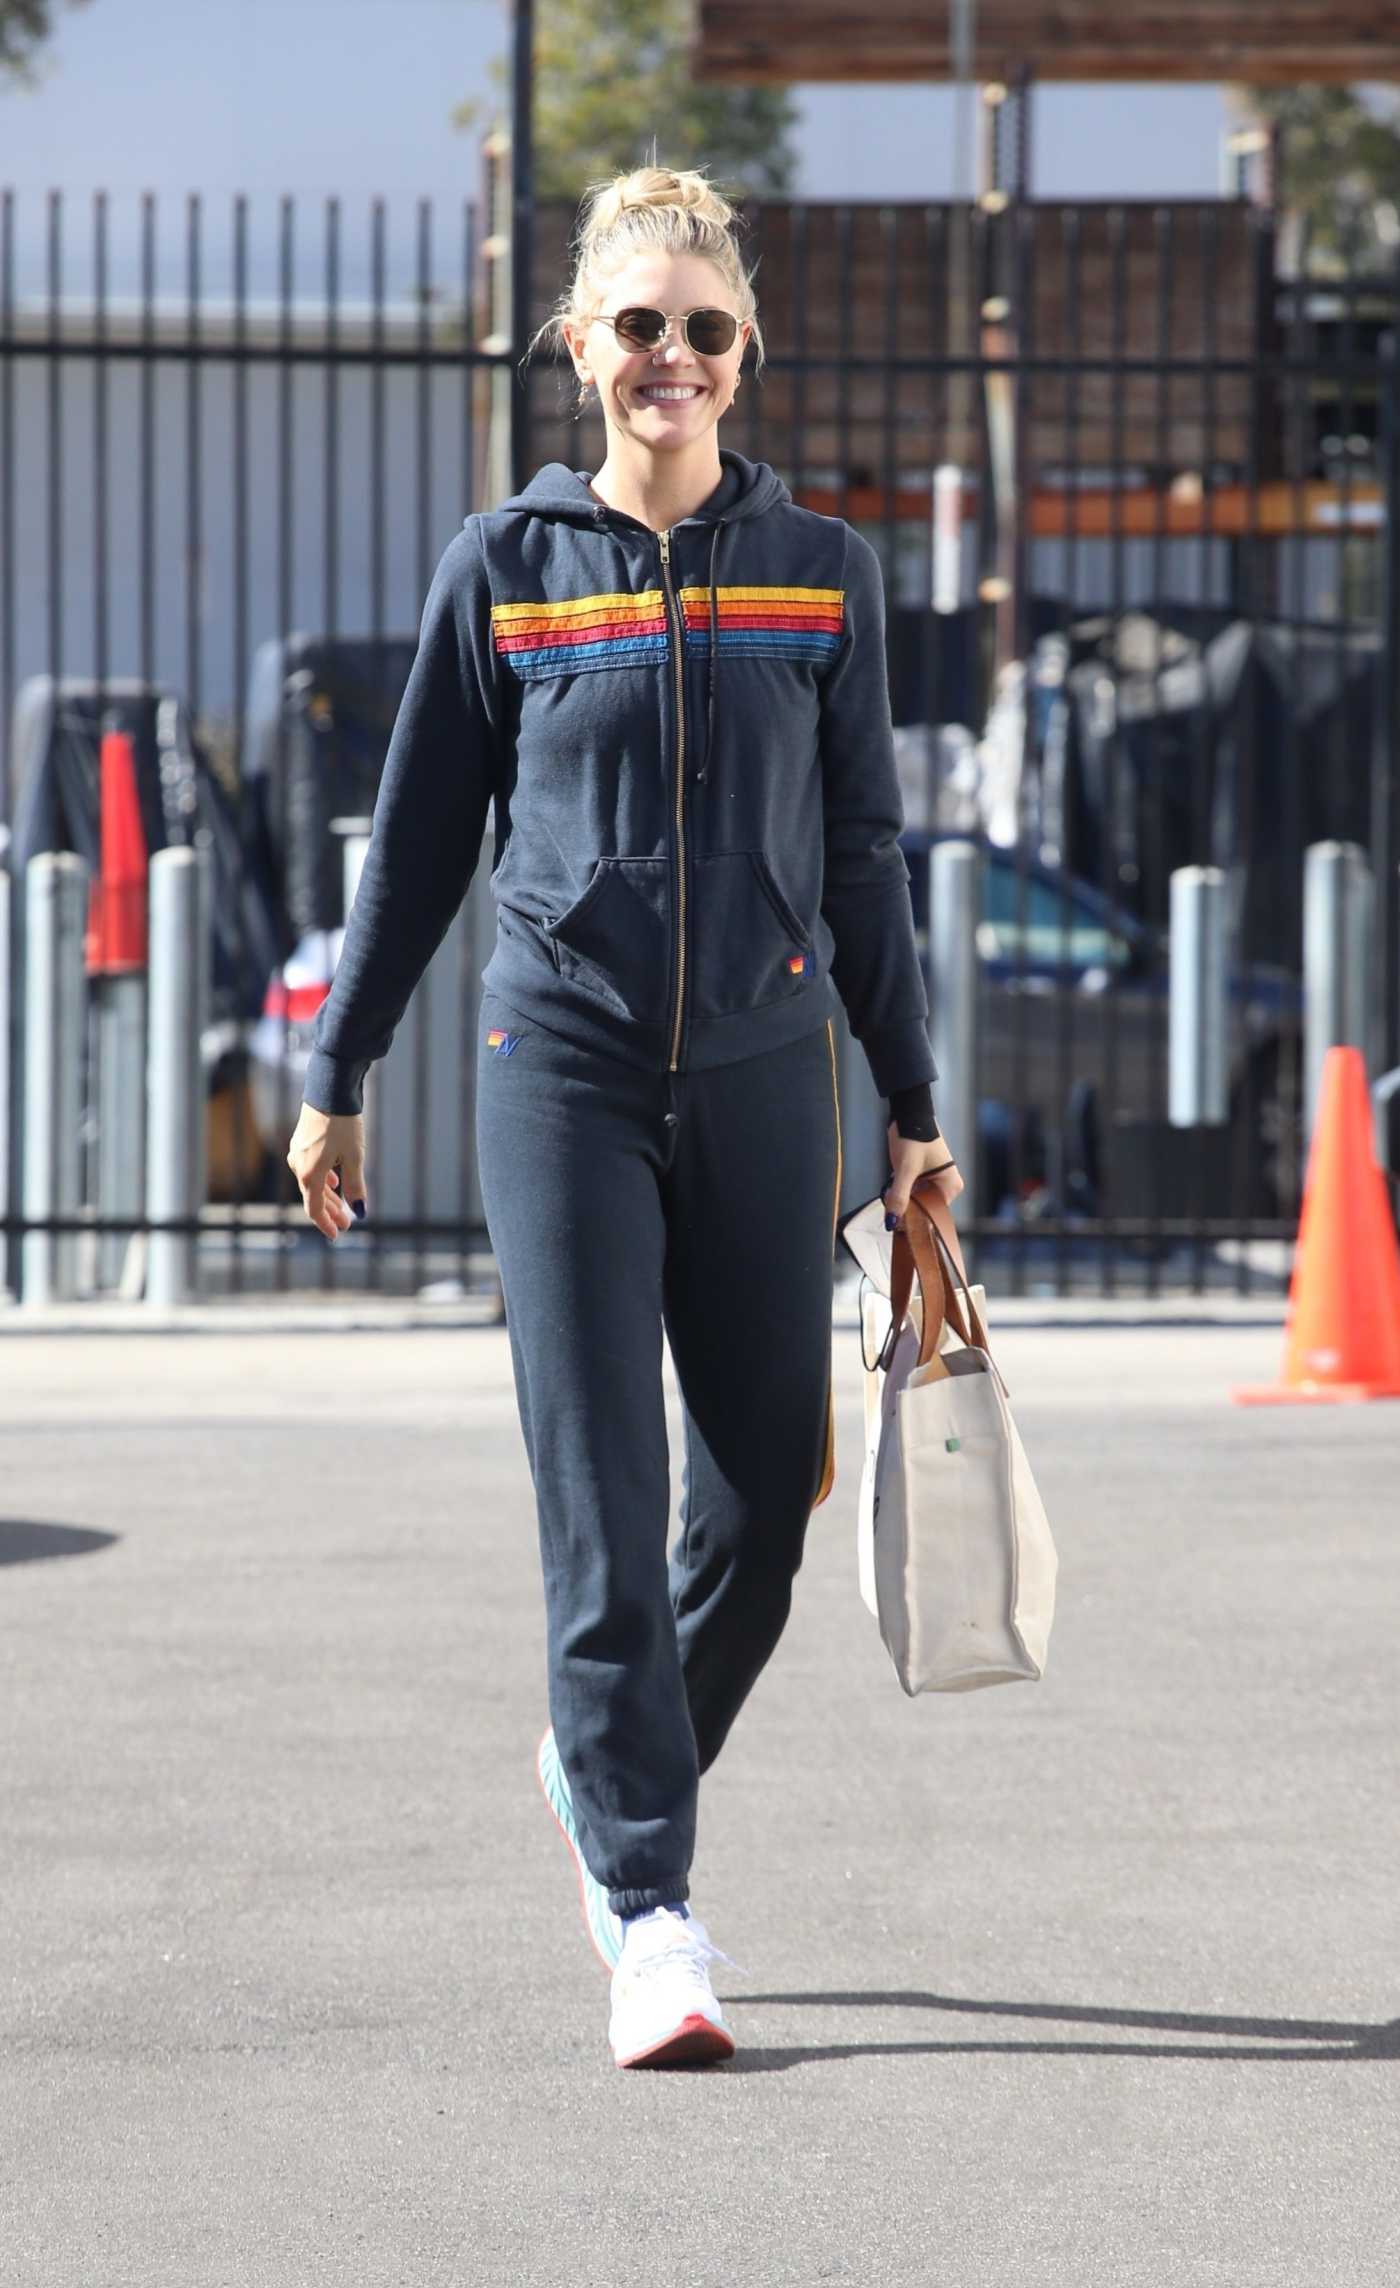 Amanda Kloots in a Black Sweatsuit Heads into the Dancing with The Stars Rehearsal Studio in Los Angeles 11/12/2021